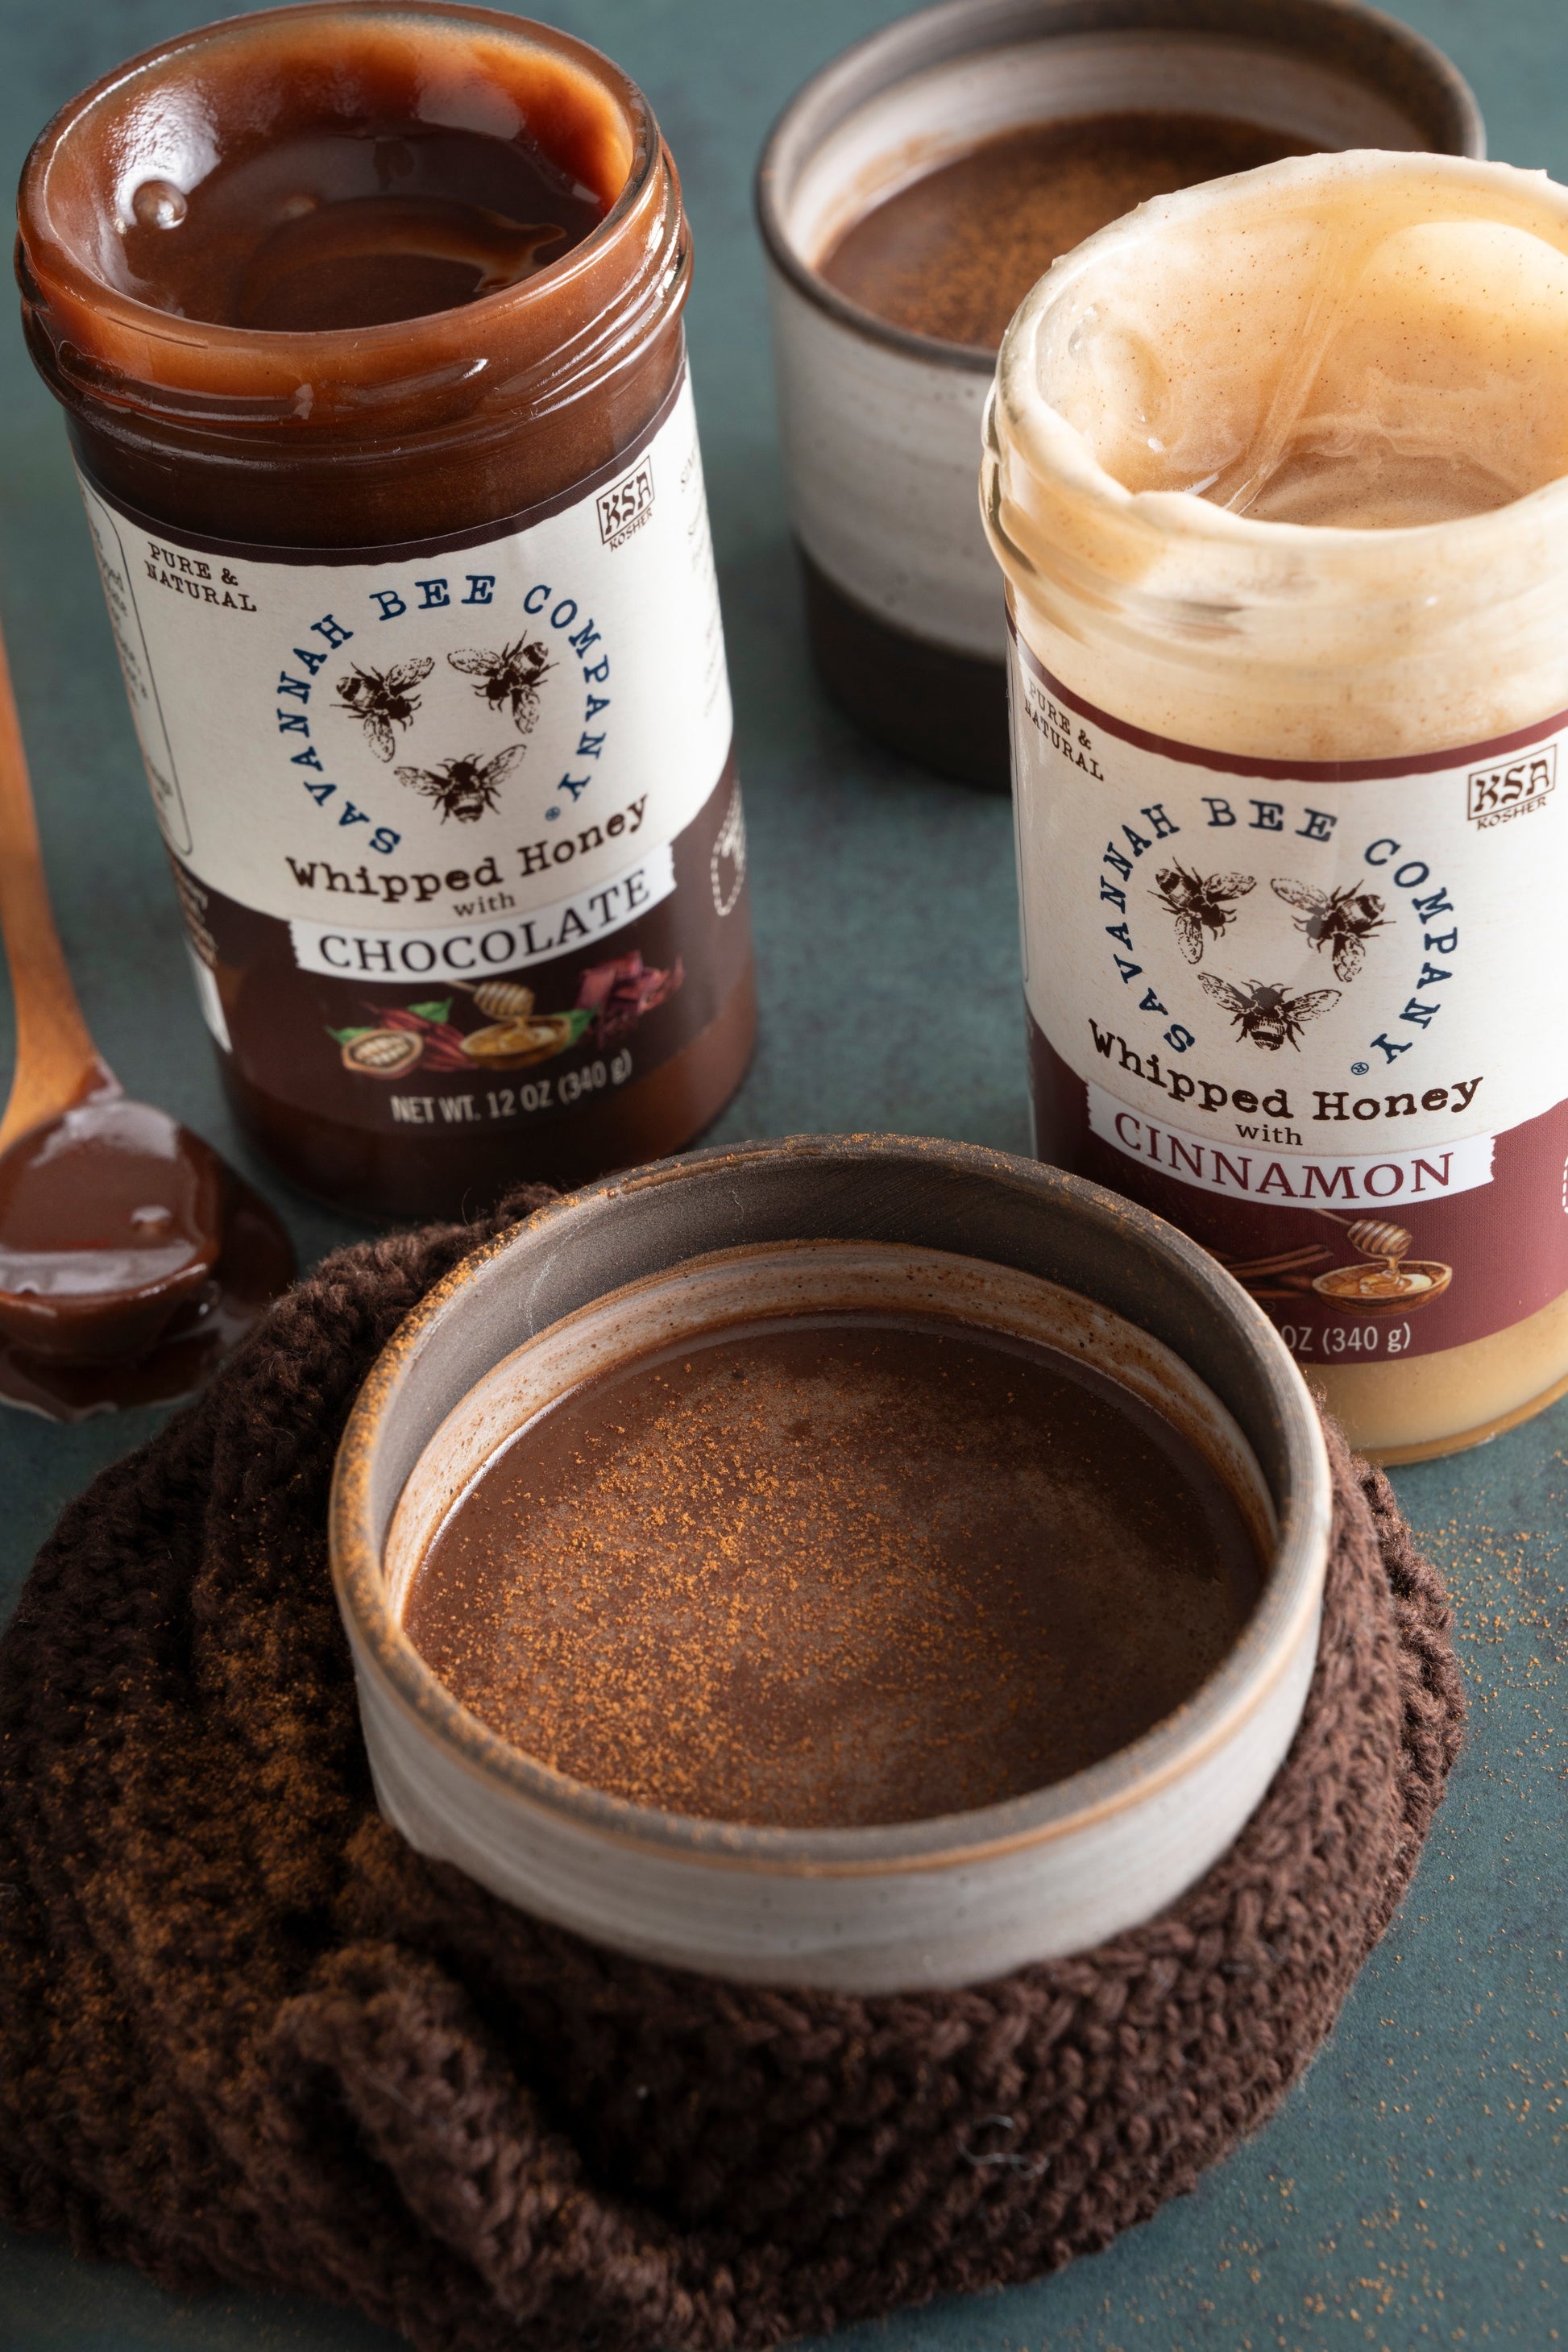 12 ounce Whipped Honey with Chocolate and Whipped honey with cinnamon with two mugs of Mexican hot chocolate.